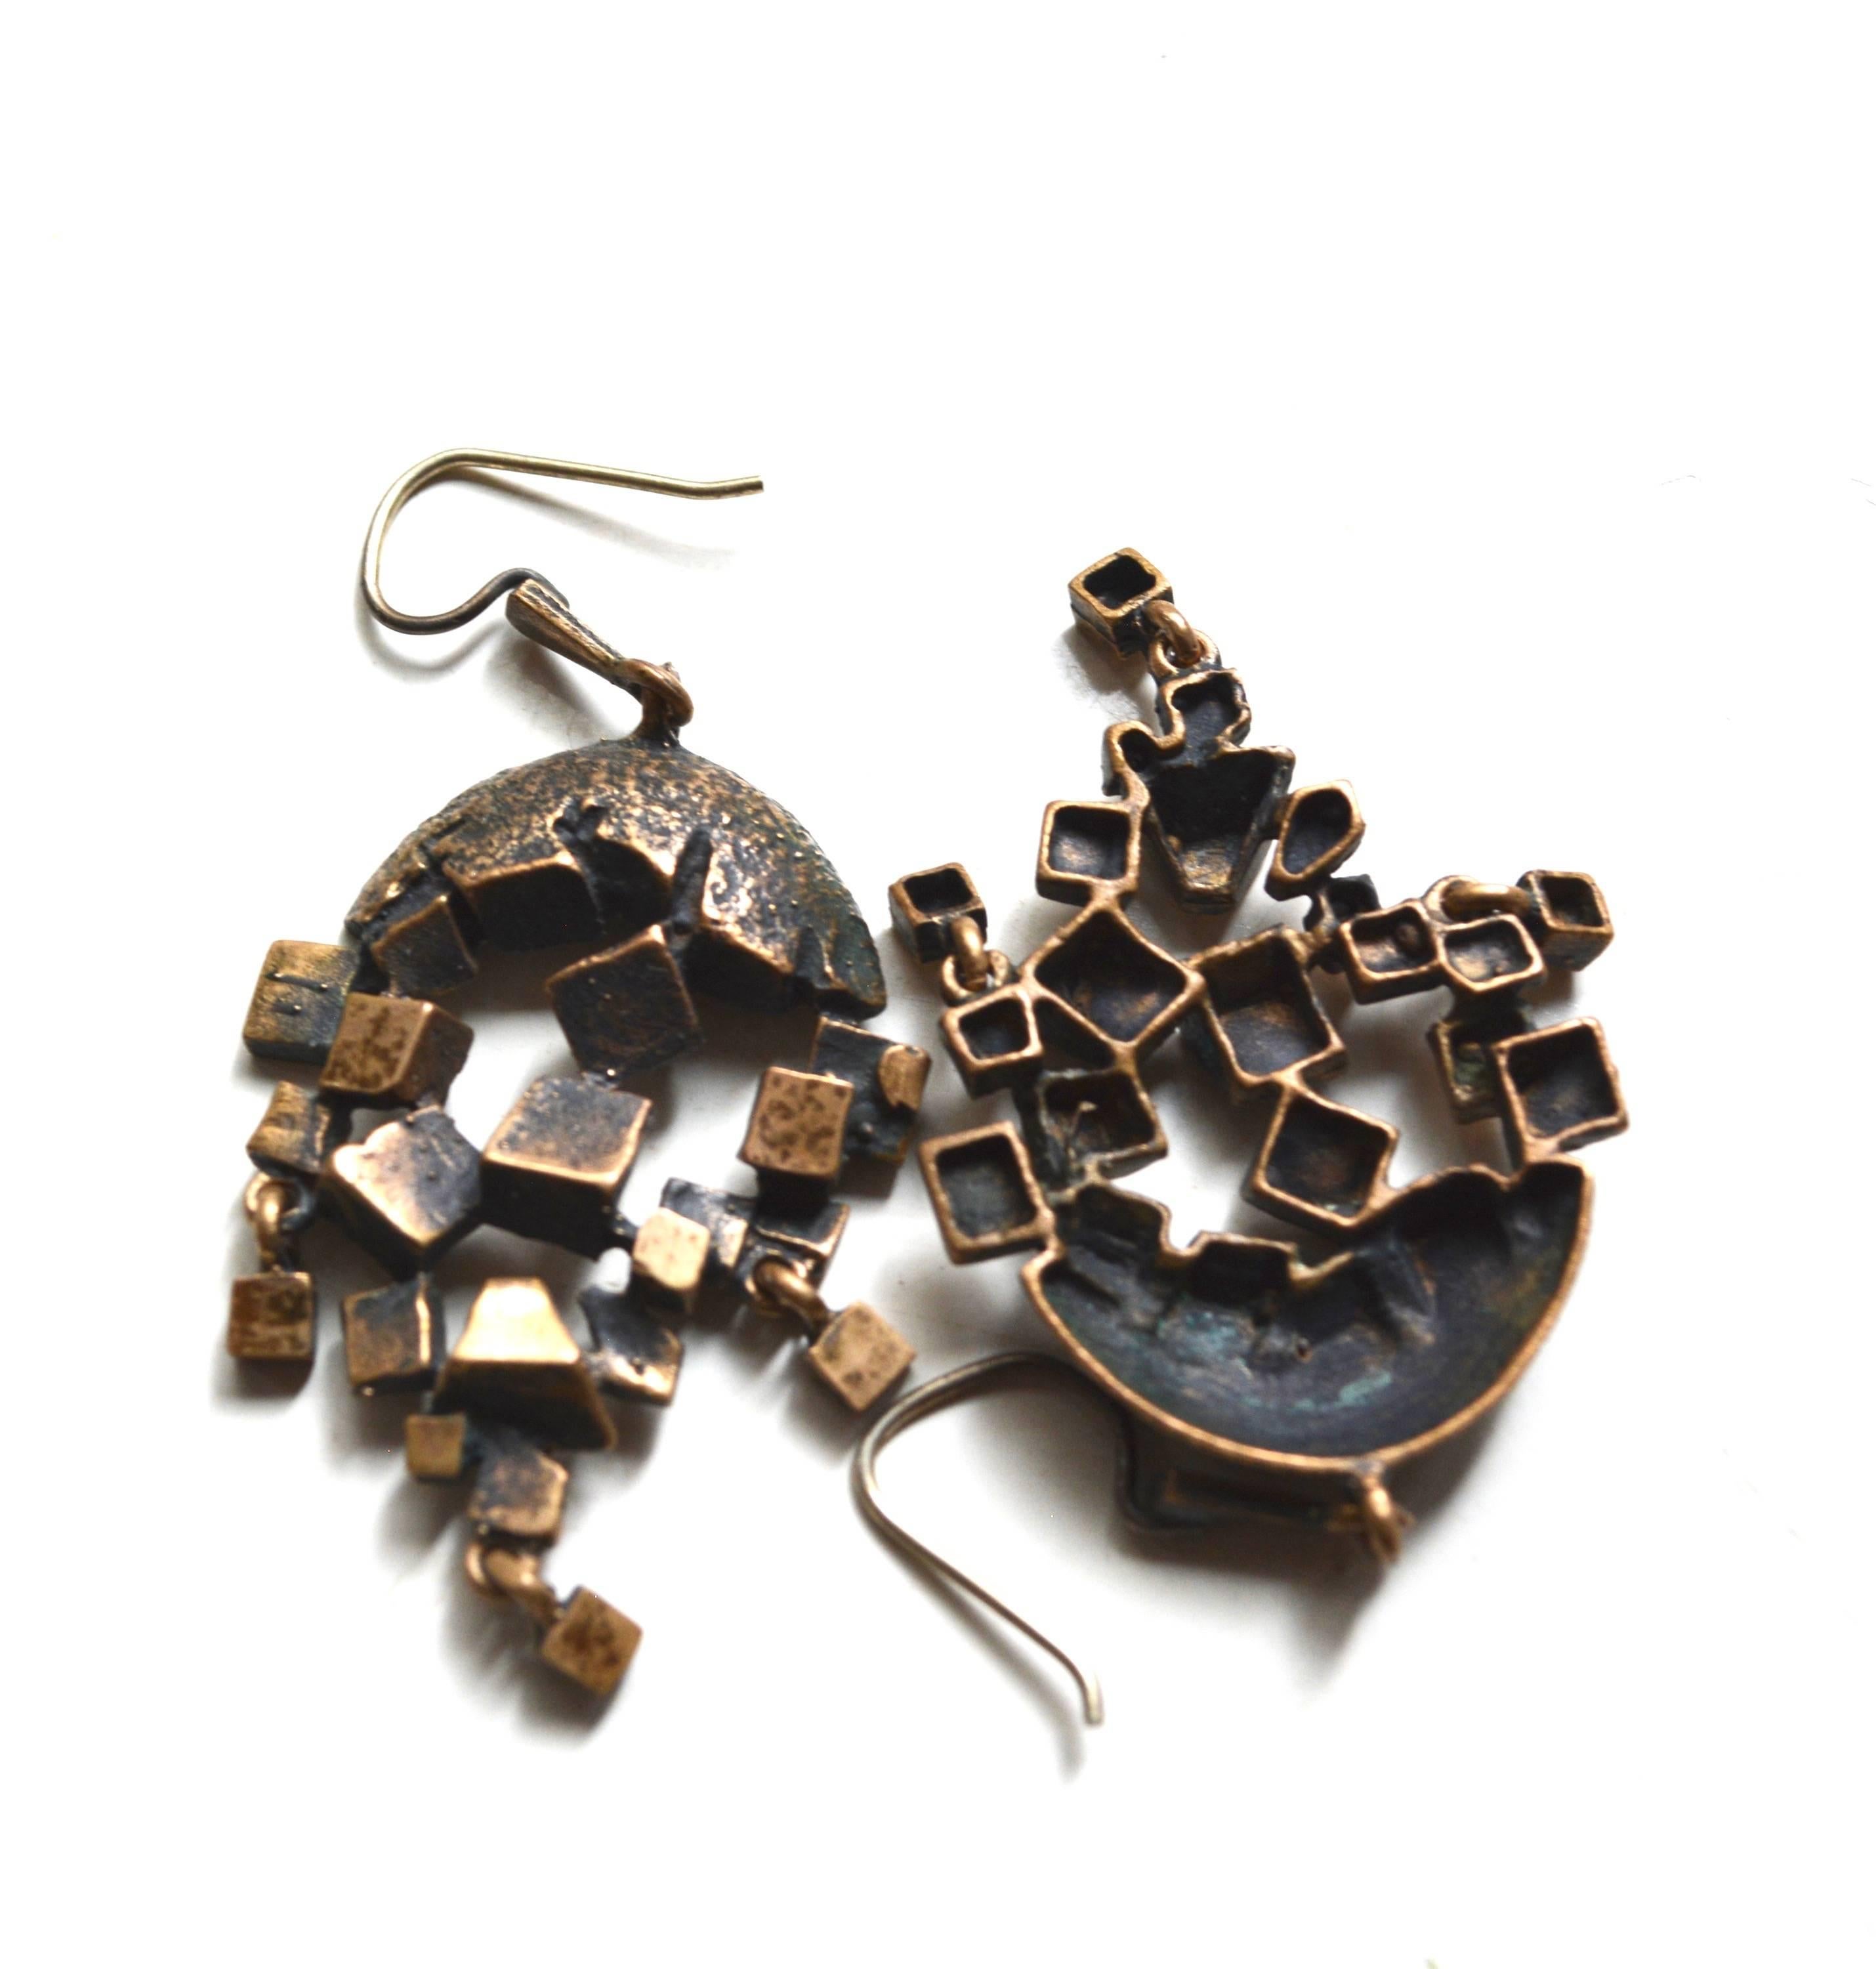 60s-70s Brutalist cube style earrings. In the style of Gilles Vidal, unsigned. Great scale and dimension.  Counting the hooks the length is about 2.5. The cube design is about 1.5